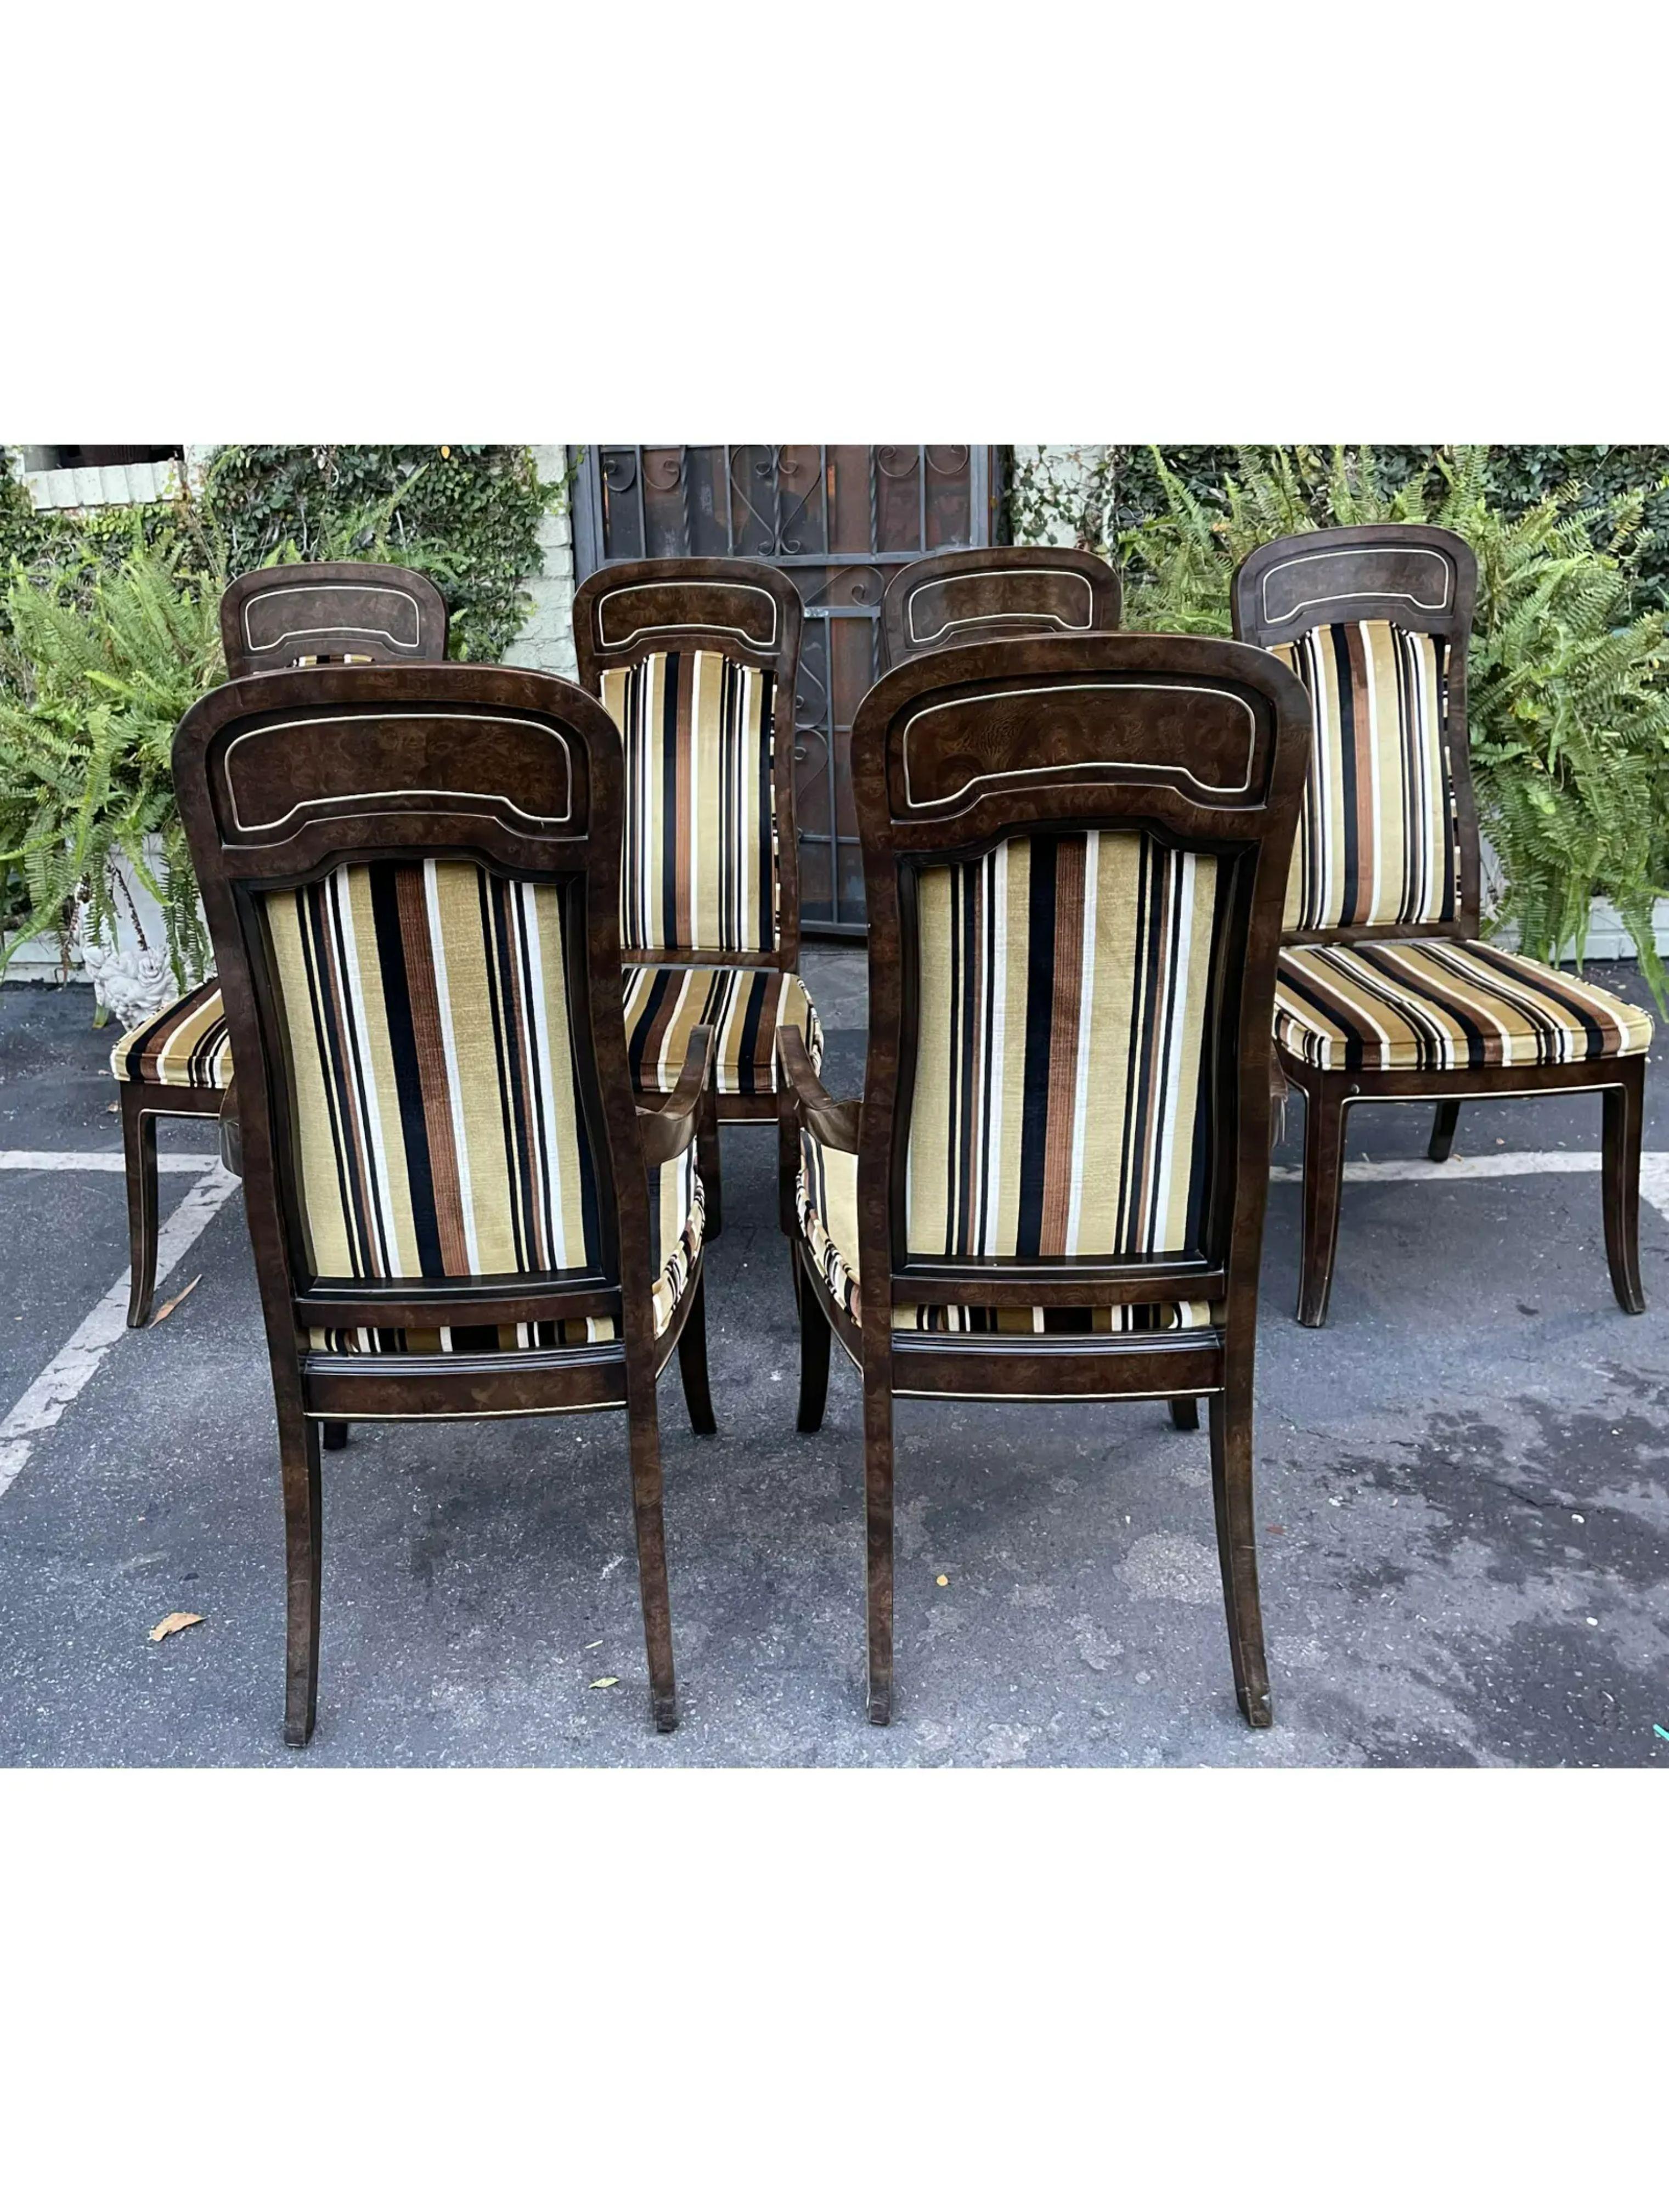 Mid-Century Modern Mastercraft Carpathian Elm and Brass Inlaid Dining Chairs - Set of 6

Additional information: 
Materials: Brass, Elm
Color: Brown
Brand: Mastercraft
Designer: Mastercraft
Period: 1970s
Styles: Mid-Century Modern
Number of